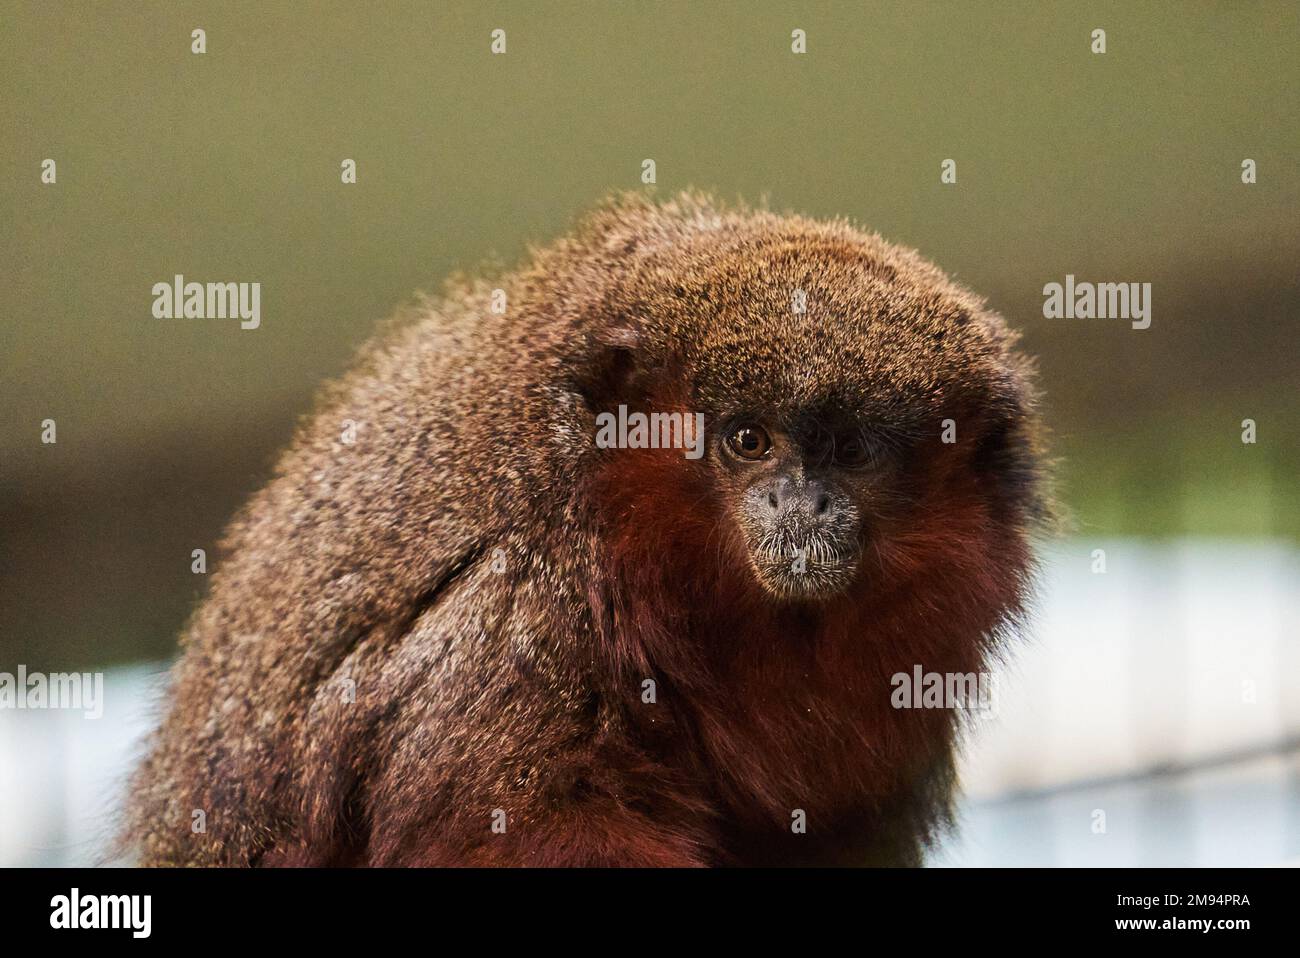 An adorable baby Red Titi Monkey with blur background Stock Photo